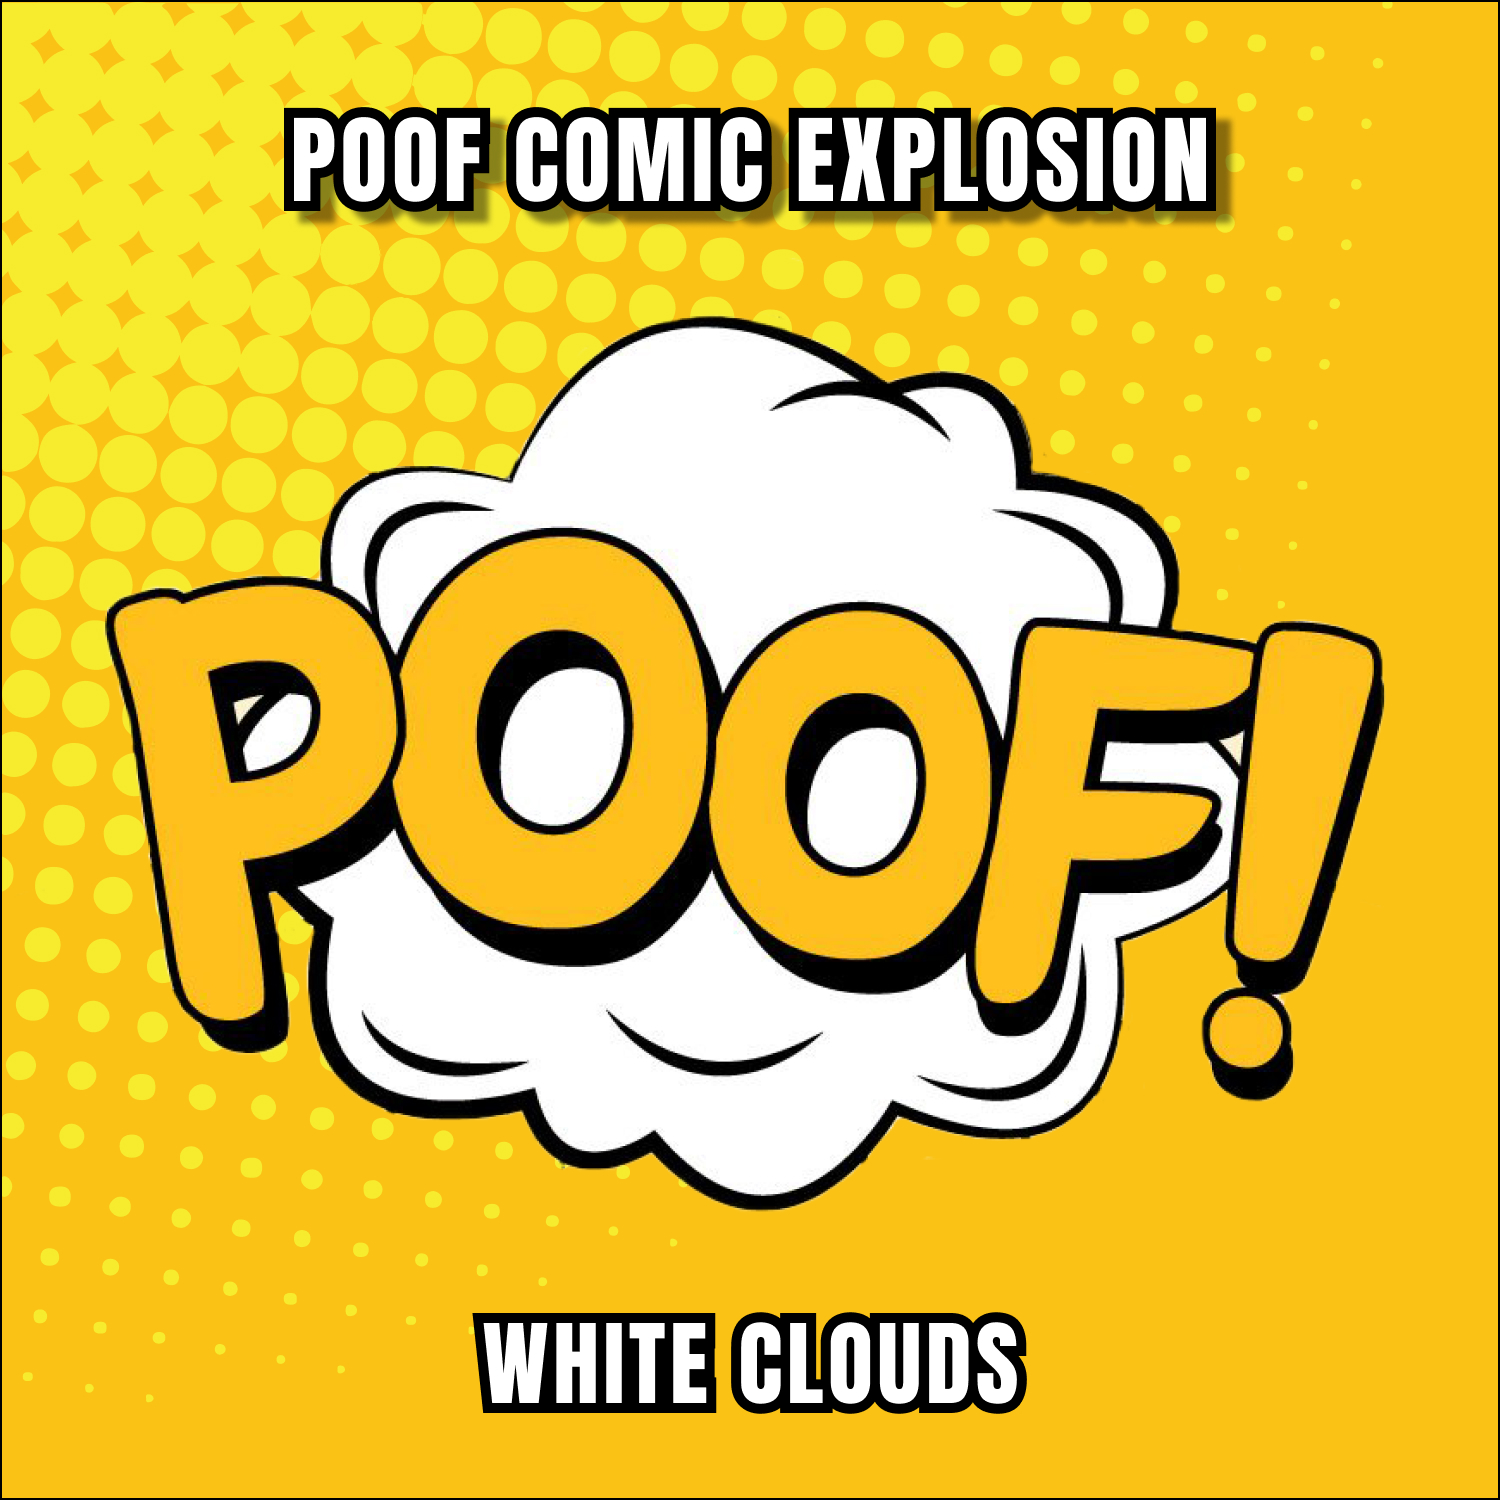 Poof Comic Explosion White Clouds.